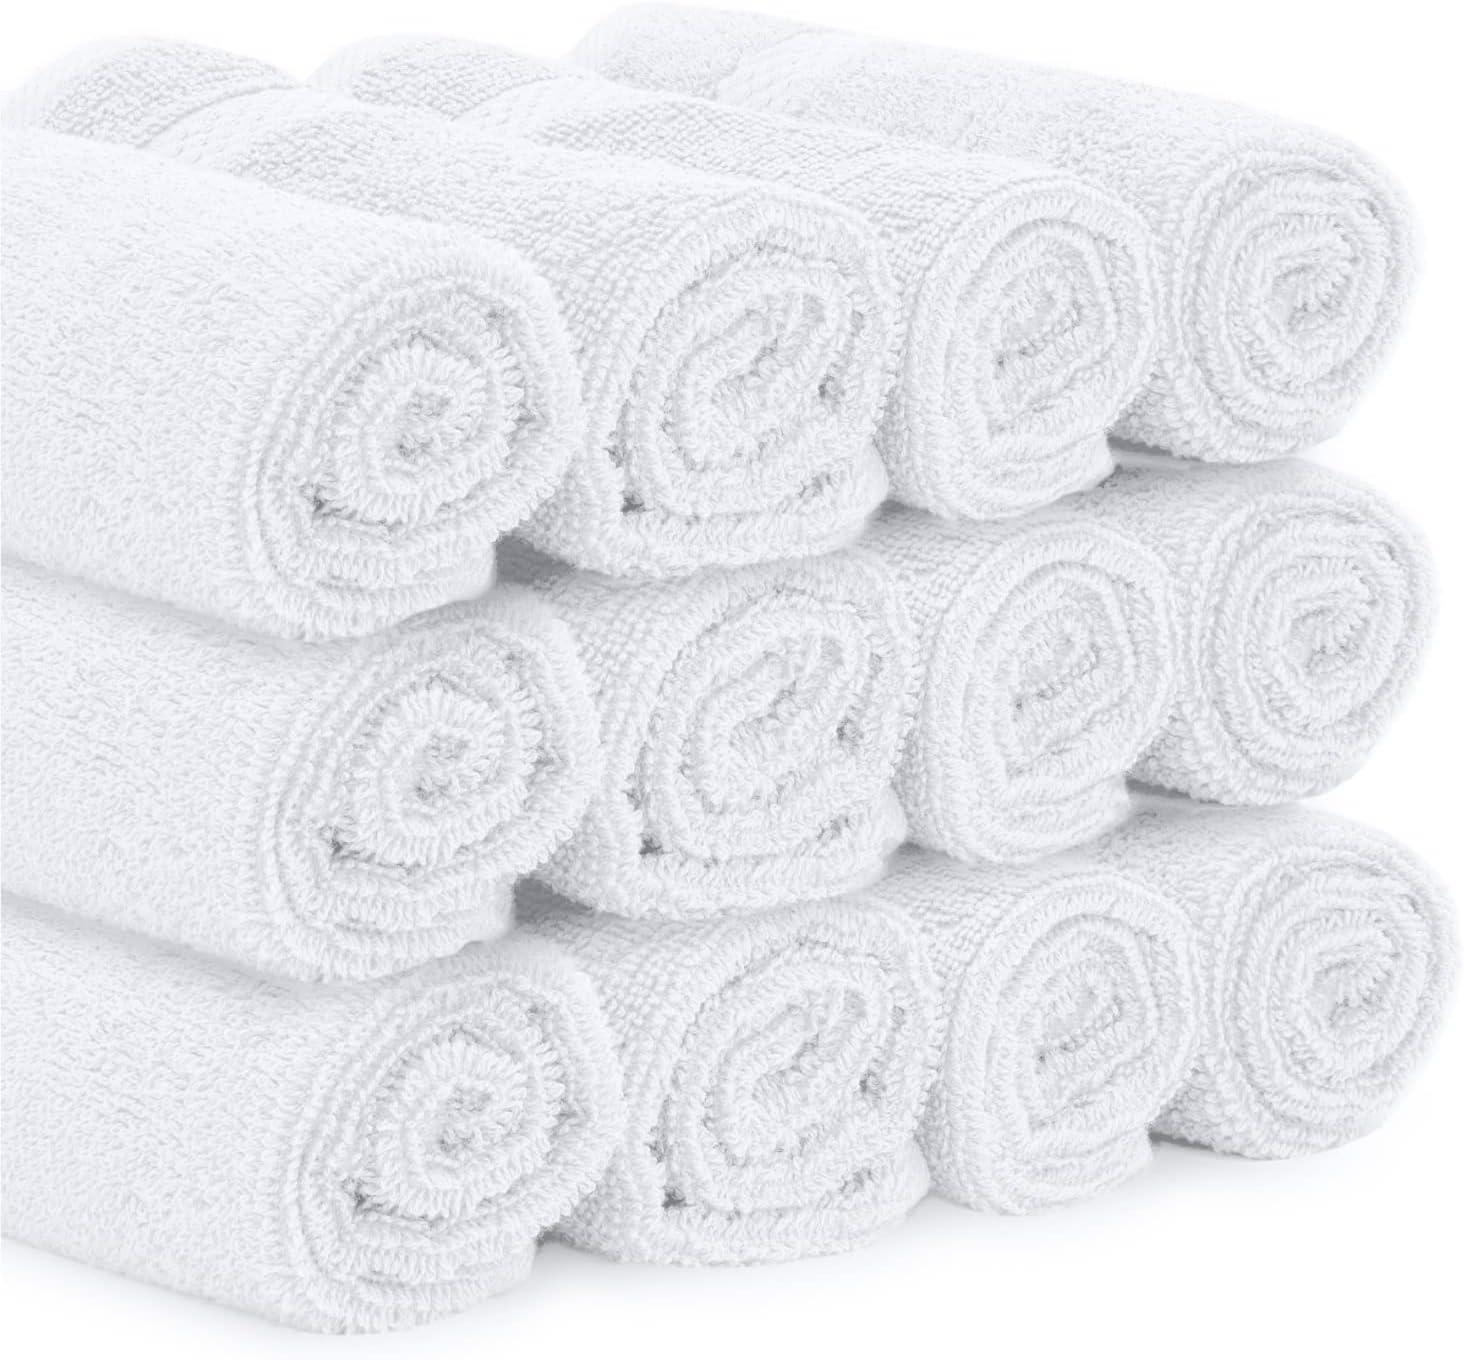 White Classic Luxury Silver Bath Towel Set - Combed Cotton Hotel Quality  Absorbent 8 Piece Towels | 2 Bath Towels | 2 Hand Towels | 4 Washcloths